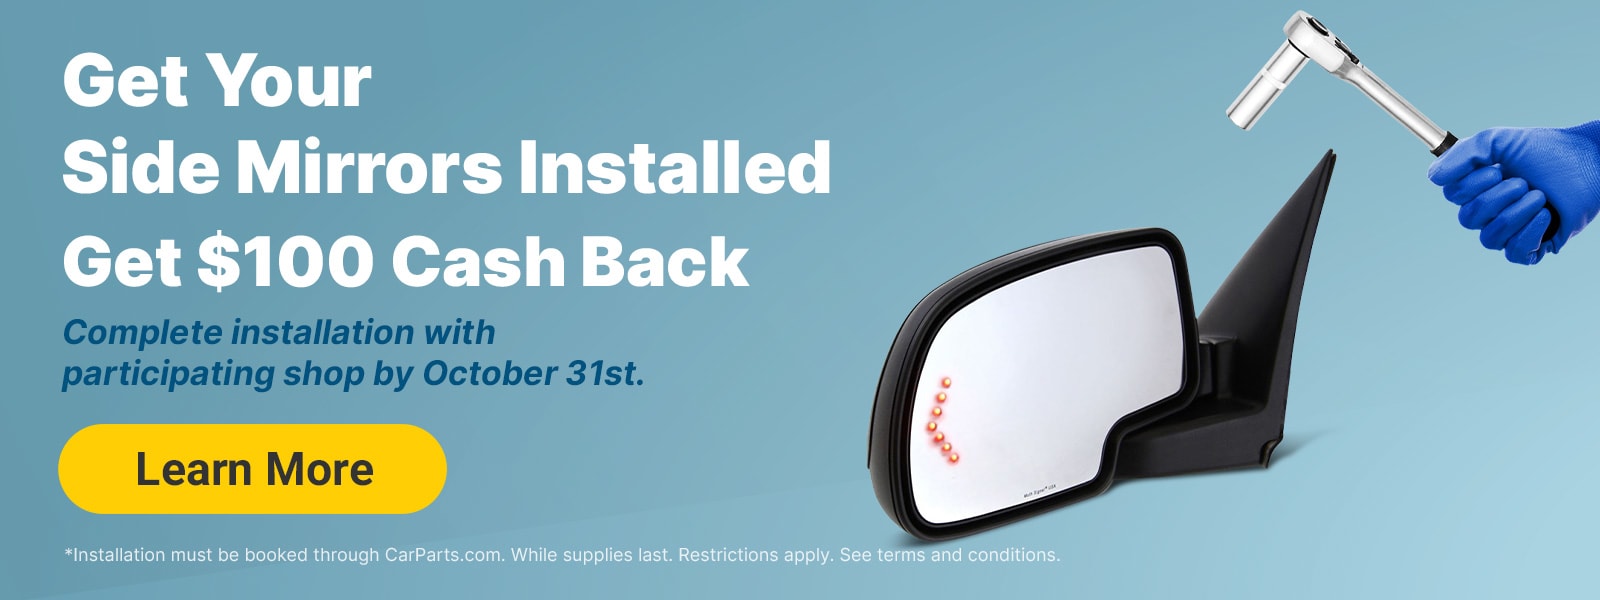 Get Your Mirrors Installed. Get $100 Cash Back.